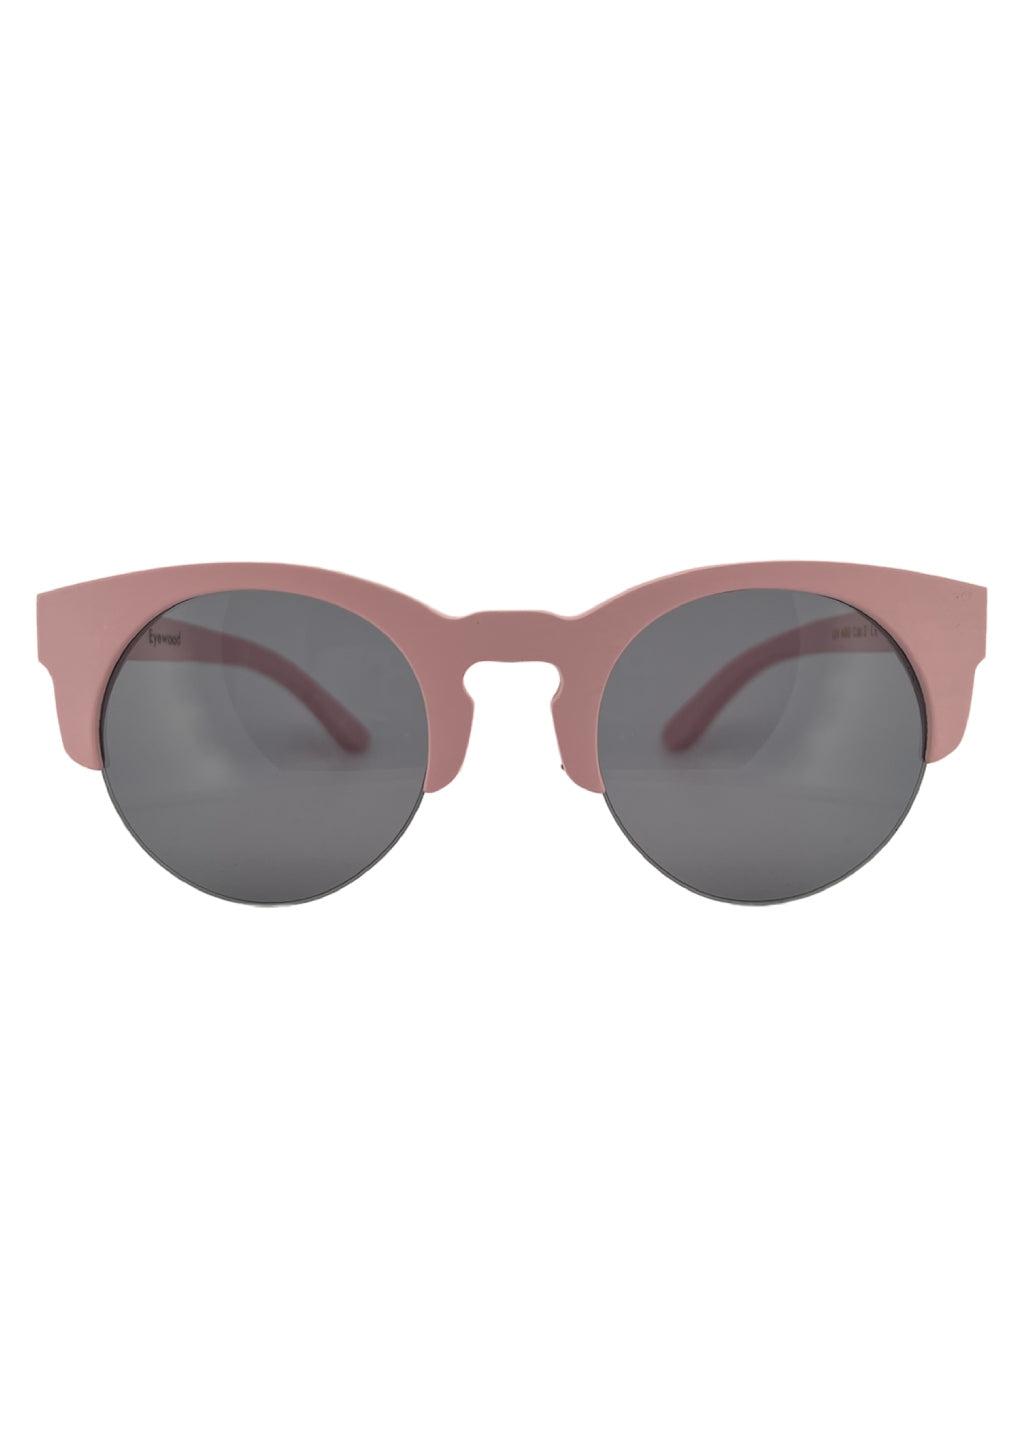 Limited Eyewood Dream - Pink - Clubmaster